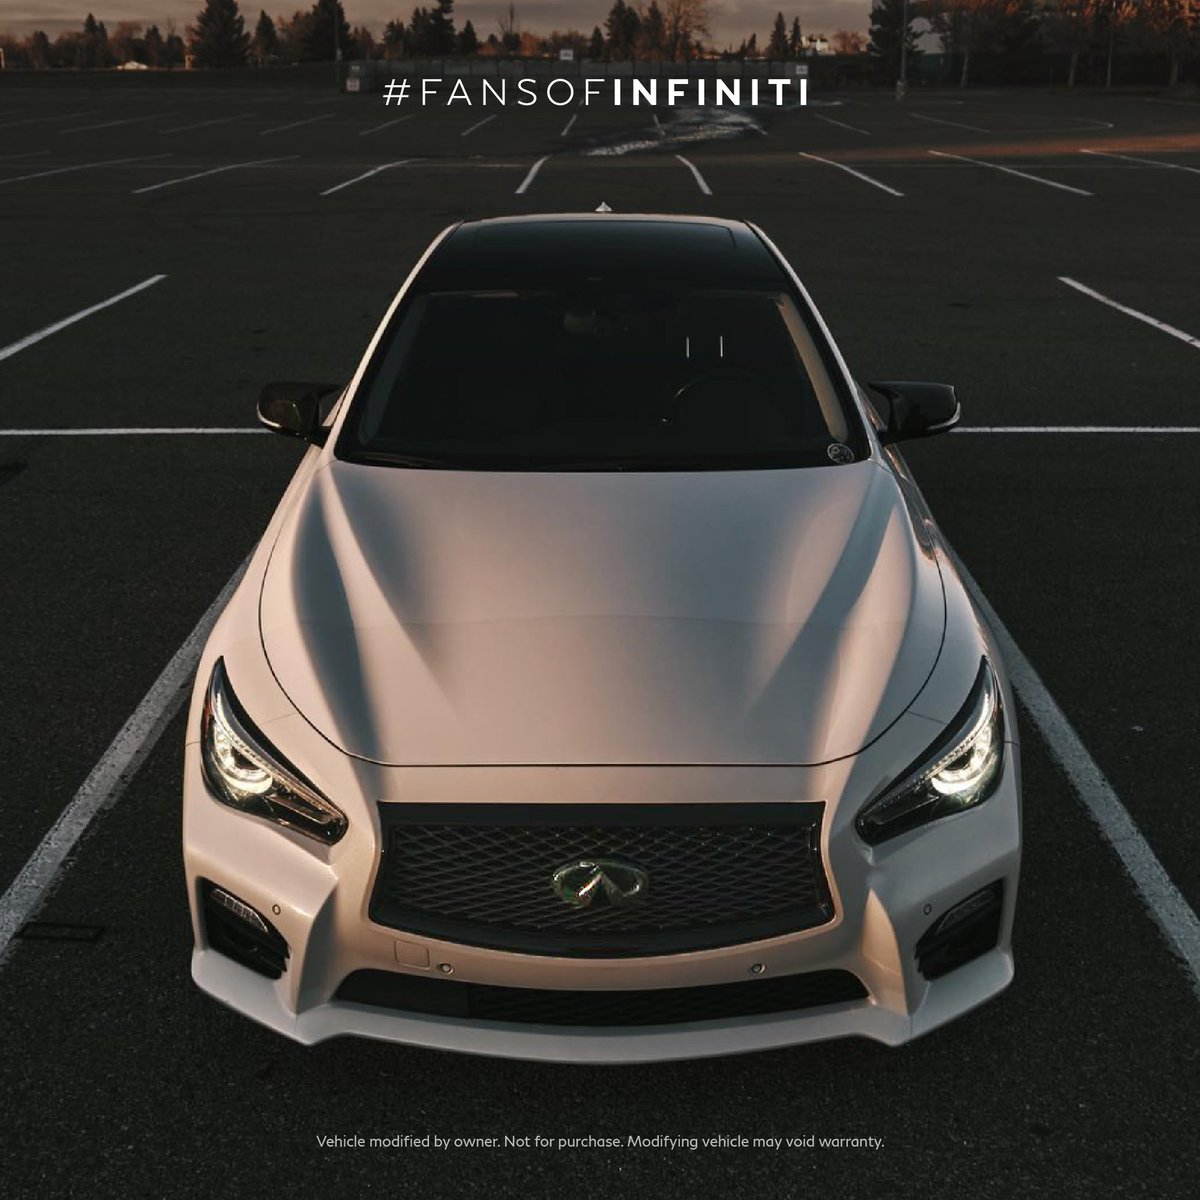 Fierce and fast with a powerful stance. #FansofINFINITI 🚘 bryan.vr30 on Instagram